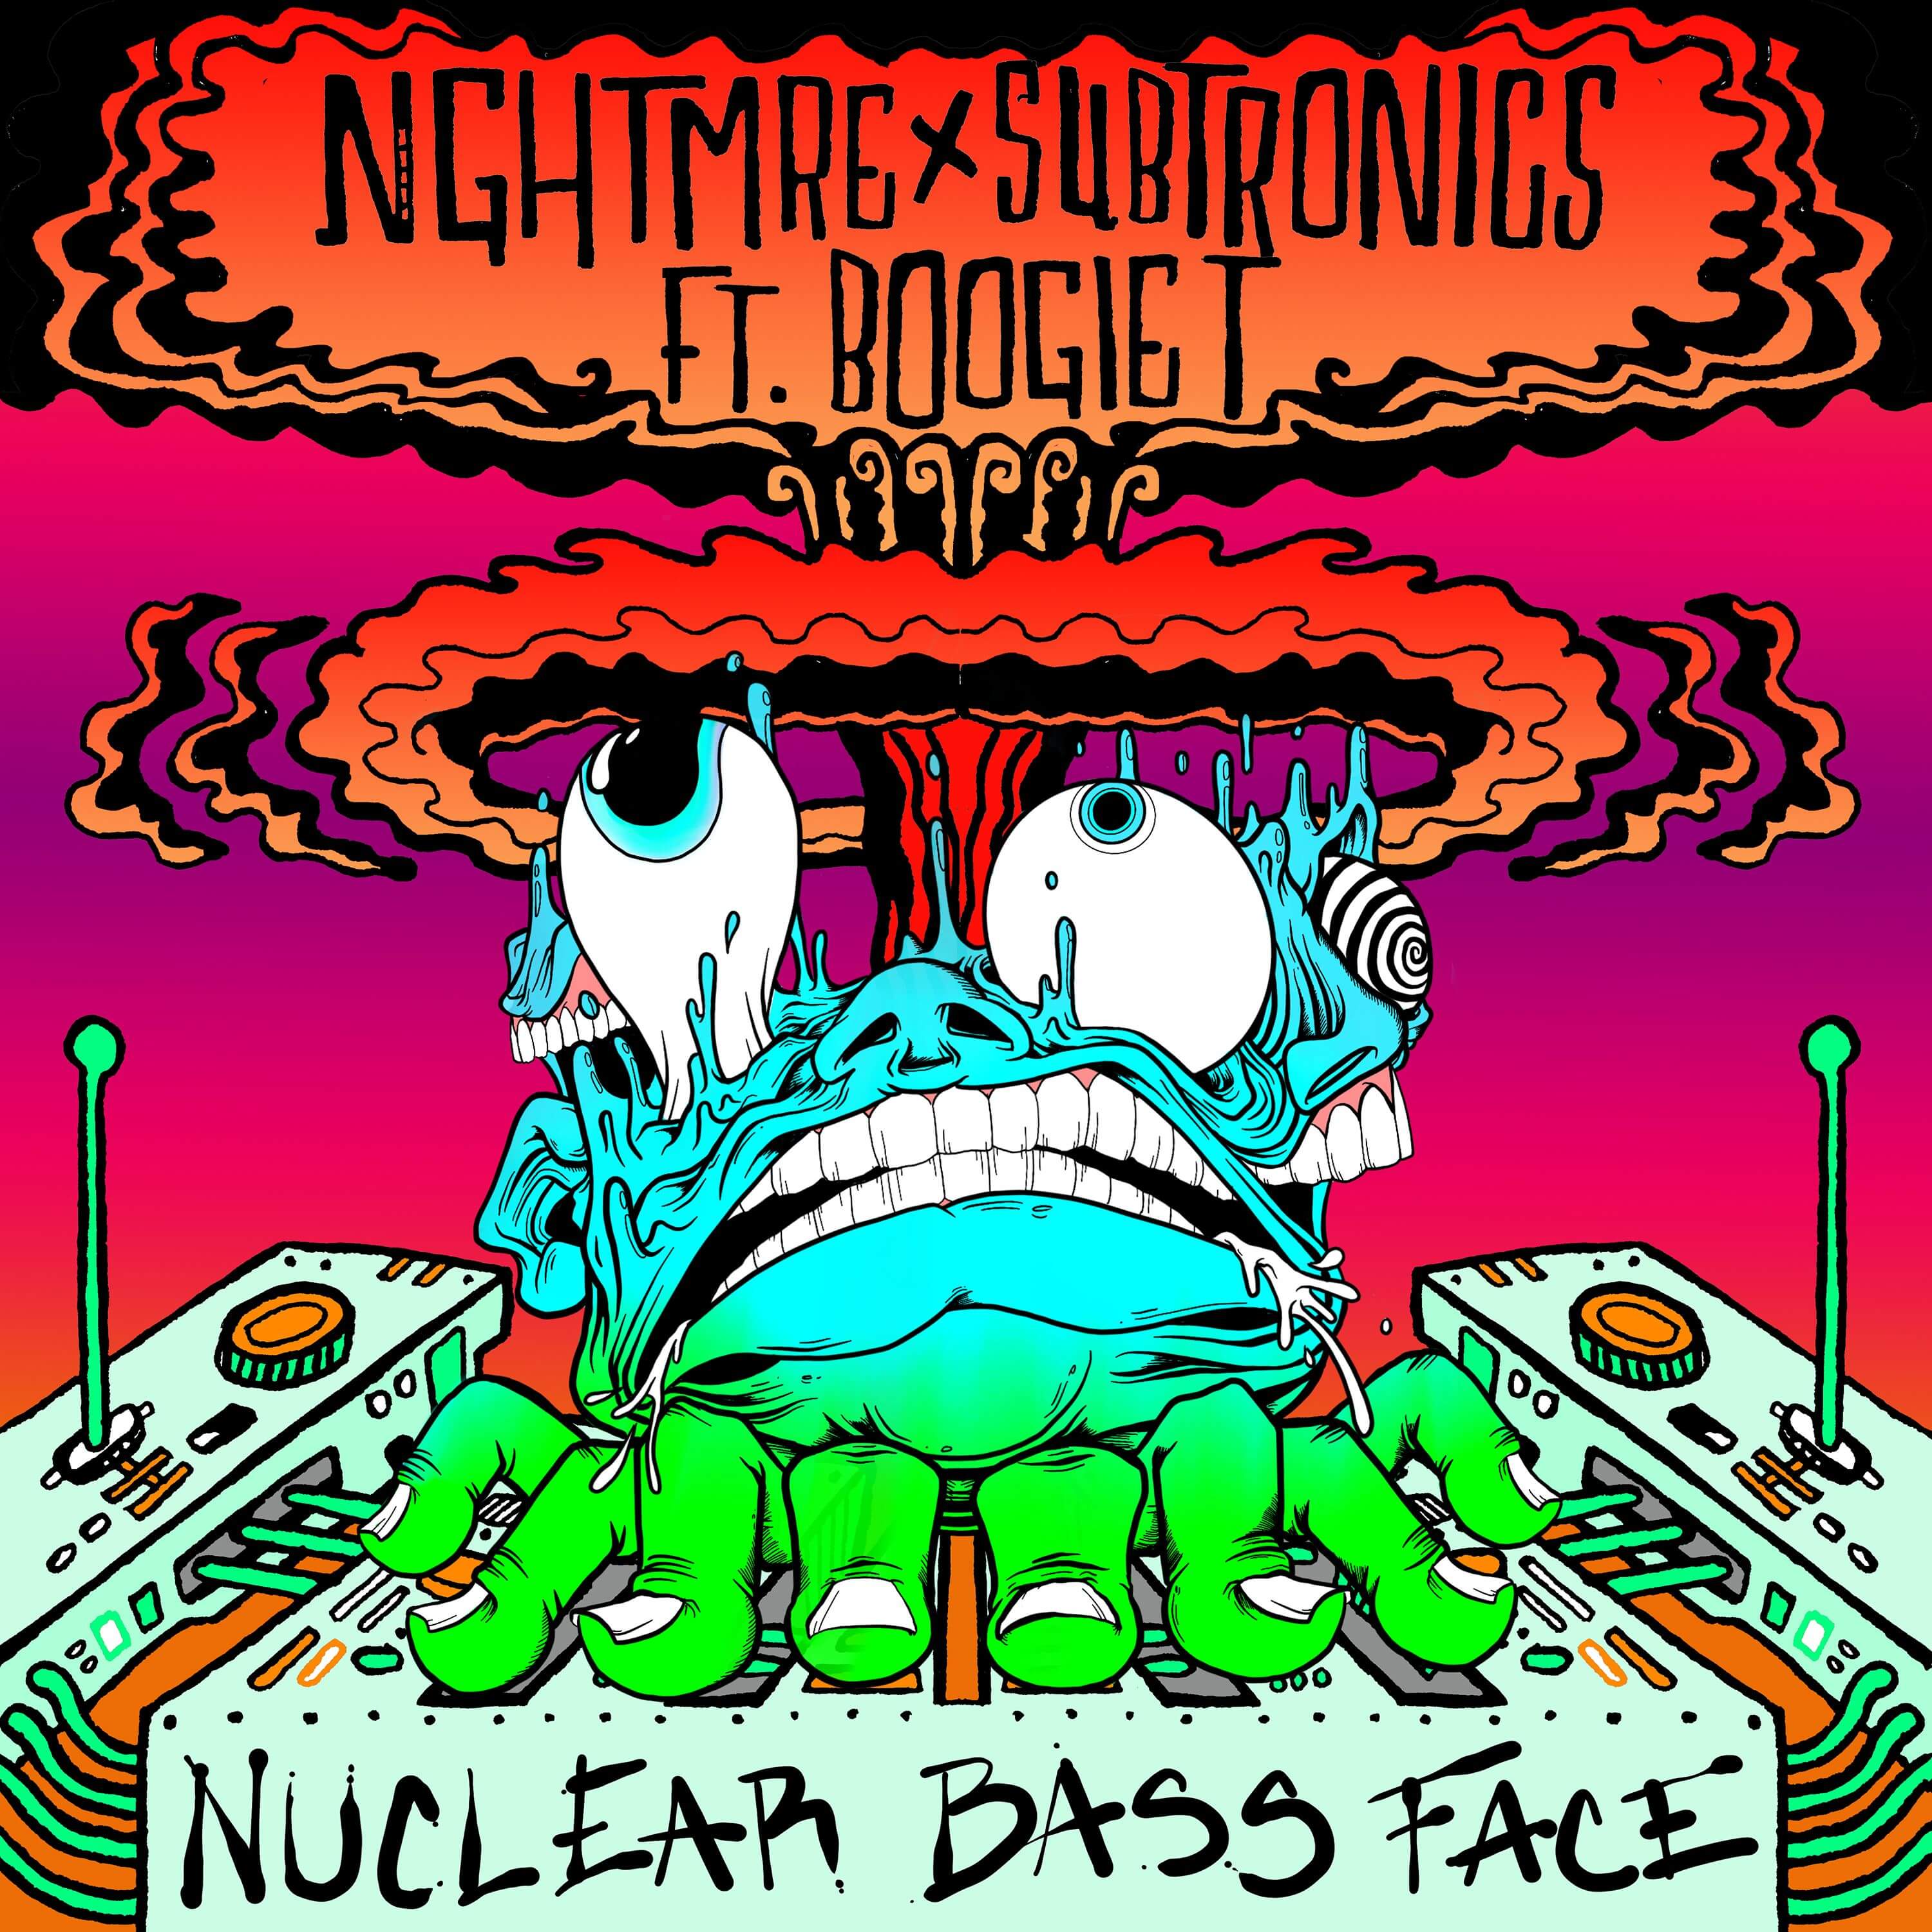 Subtronics x NGHTMRE x Boogie T Gave Us A Nasty ‘Nuclear Bass Face’